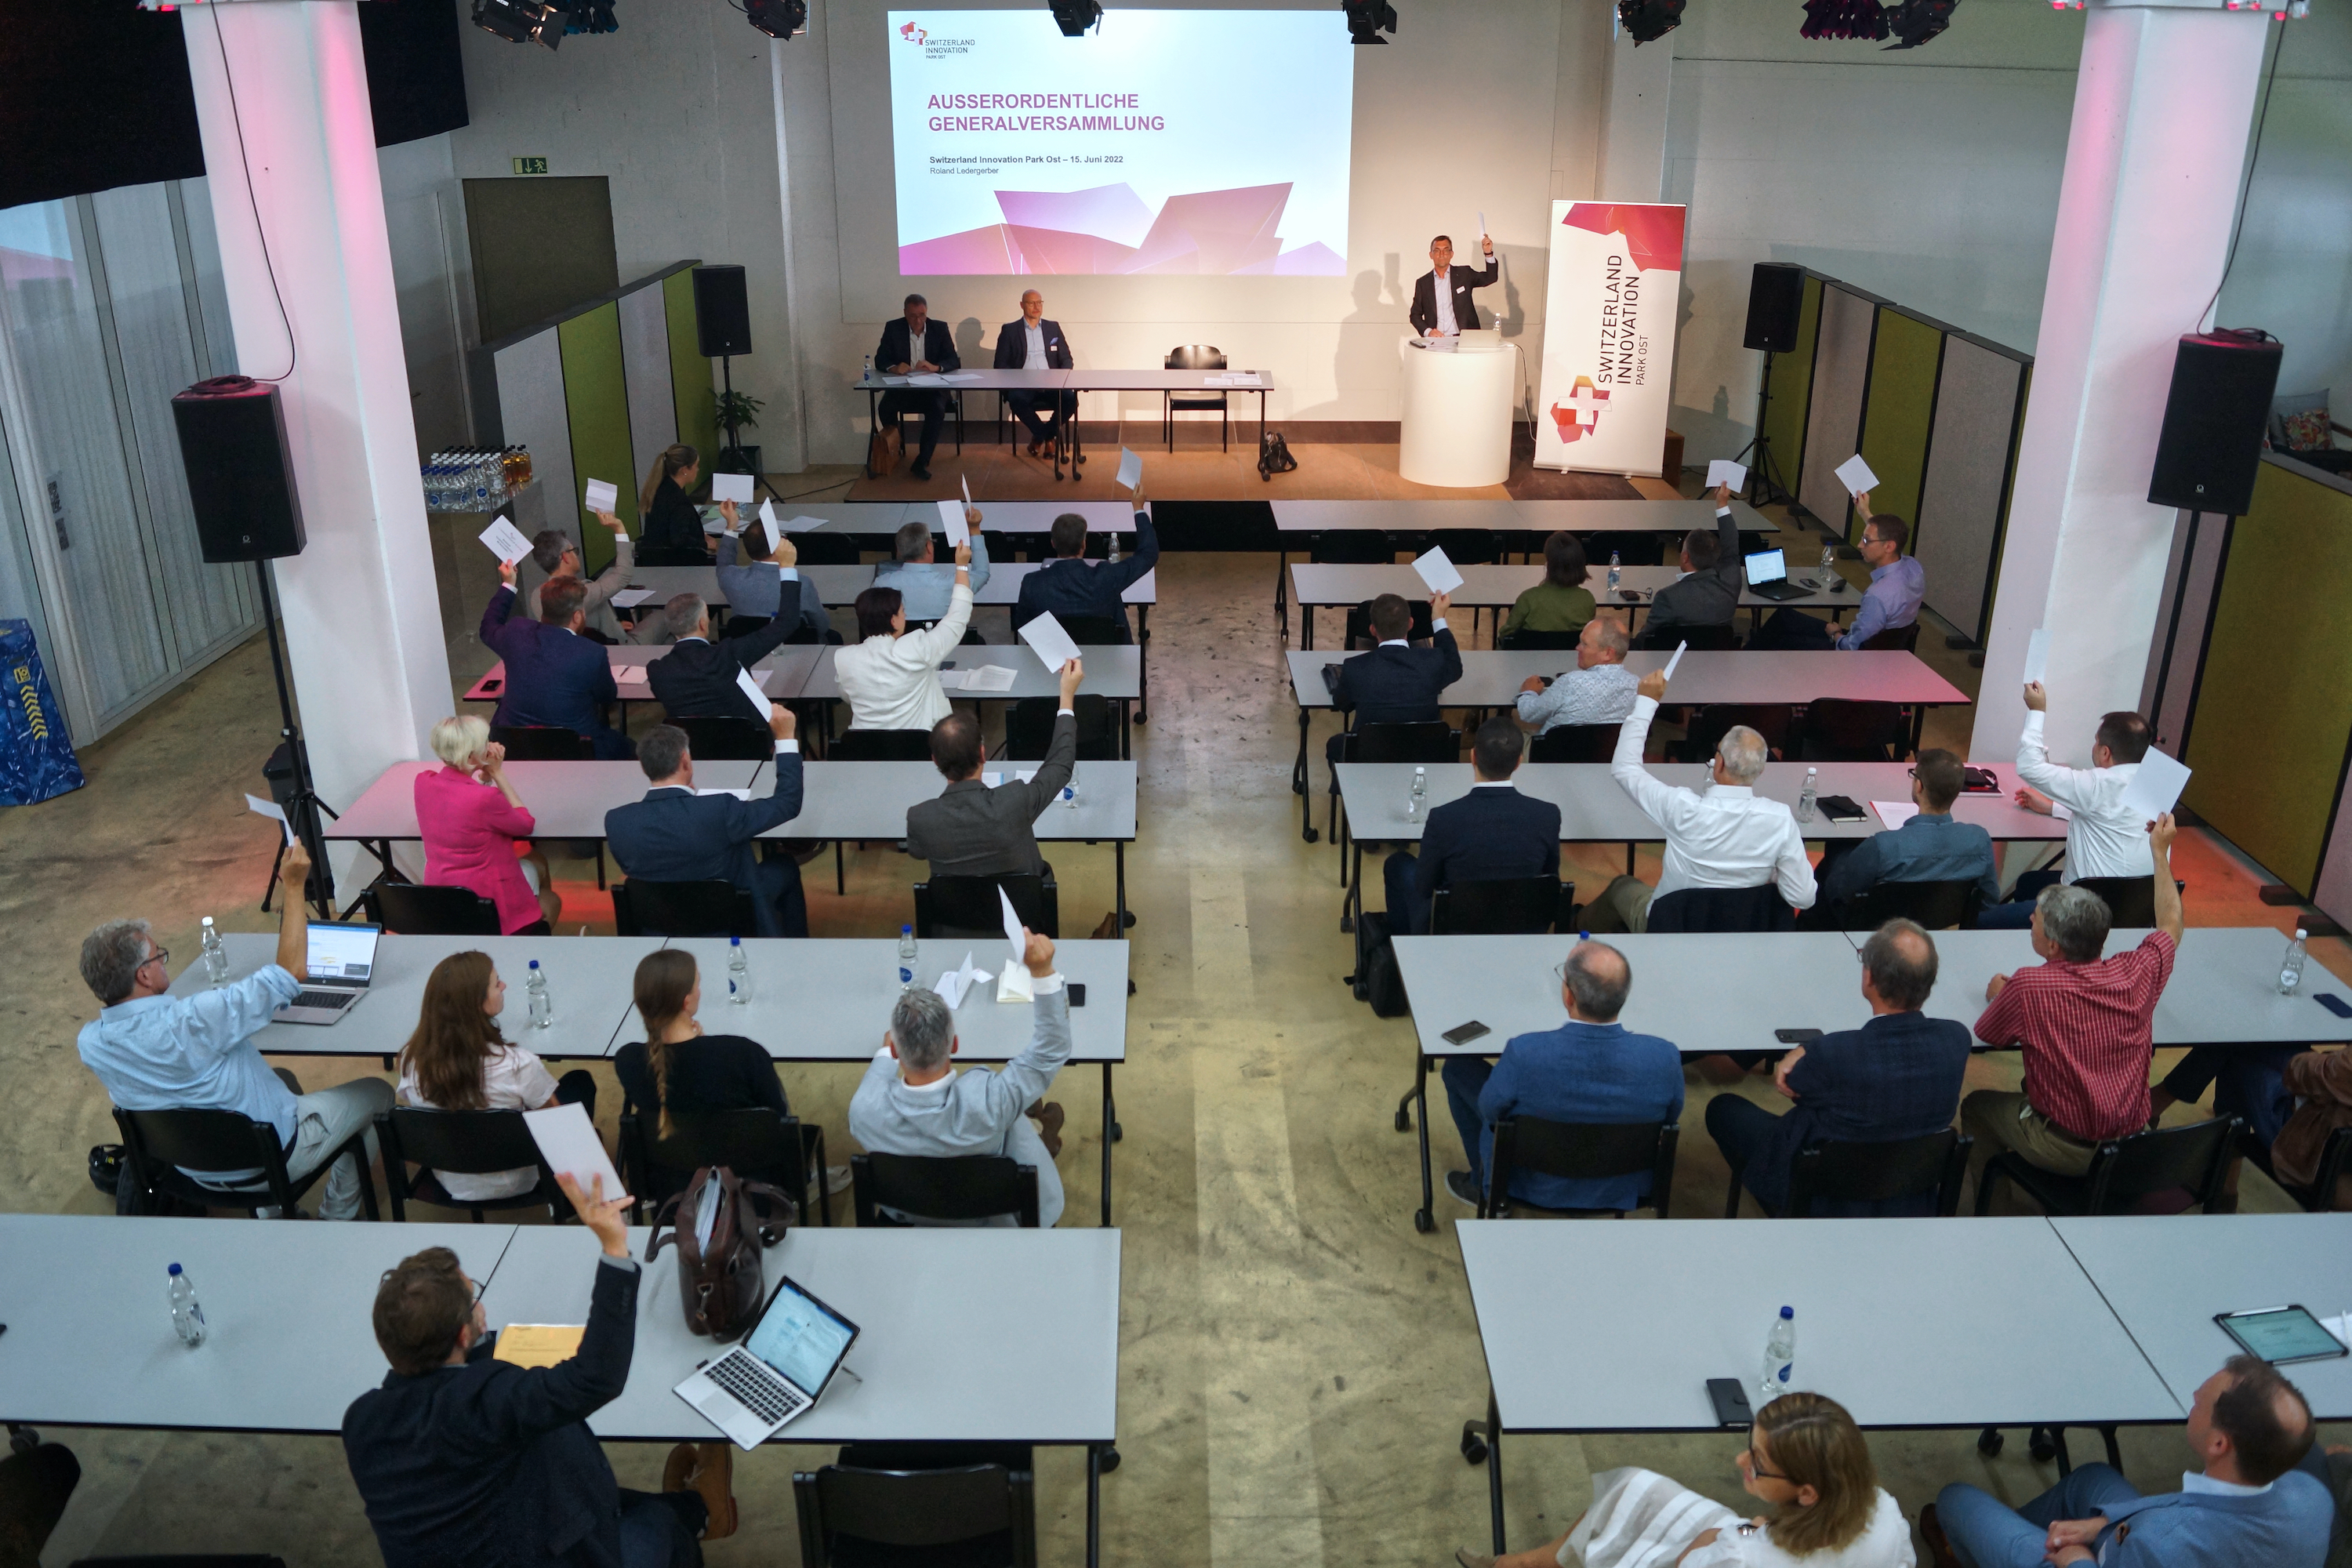 On June 15, the extraordinary general meeting of SIP Ost AG and the general meetings of the Startfeld and Startfeld Innovationszentrum associations unanimously approved the merger.